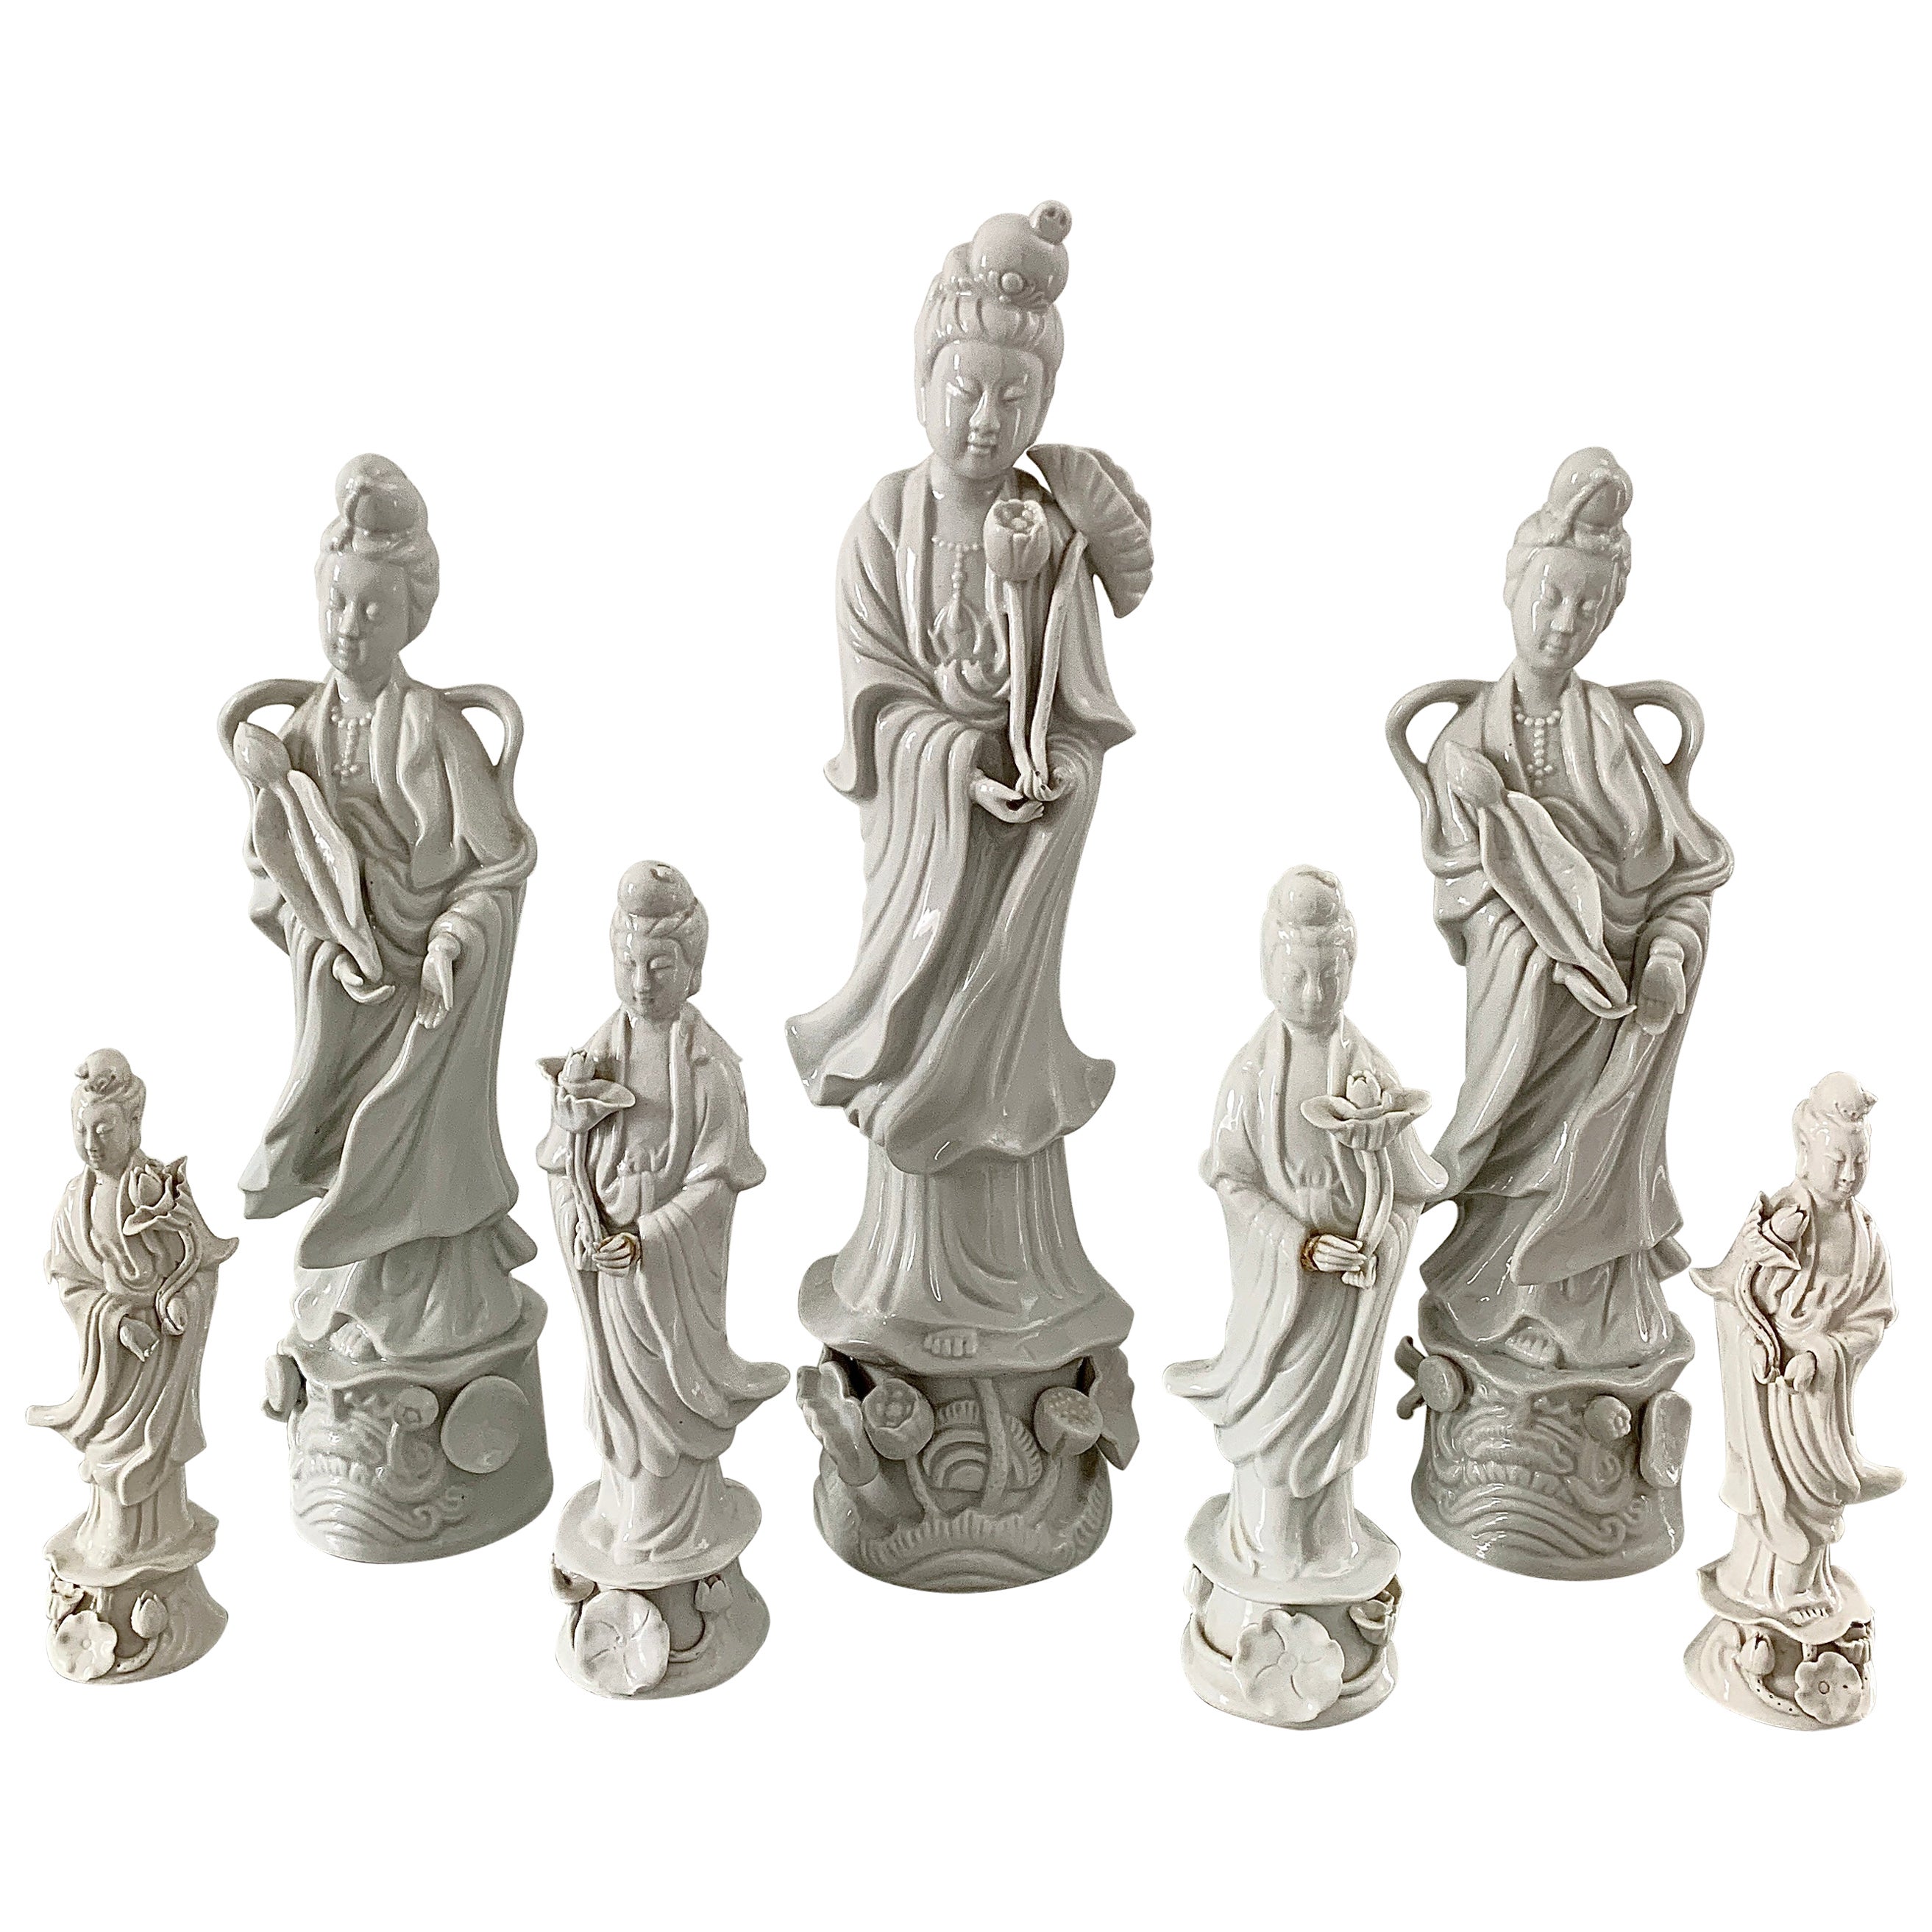 Collection of Chinoiserie Blanc De Chine White Porcelain Figures, a Set of 7